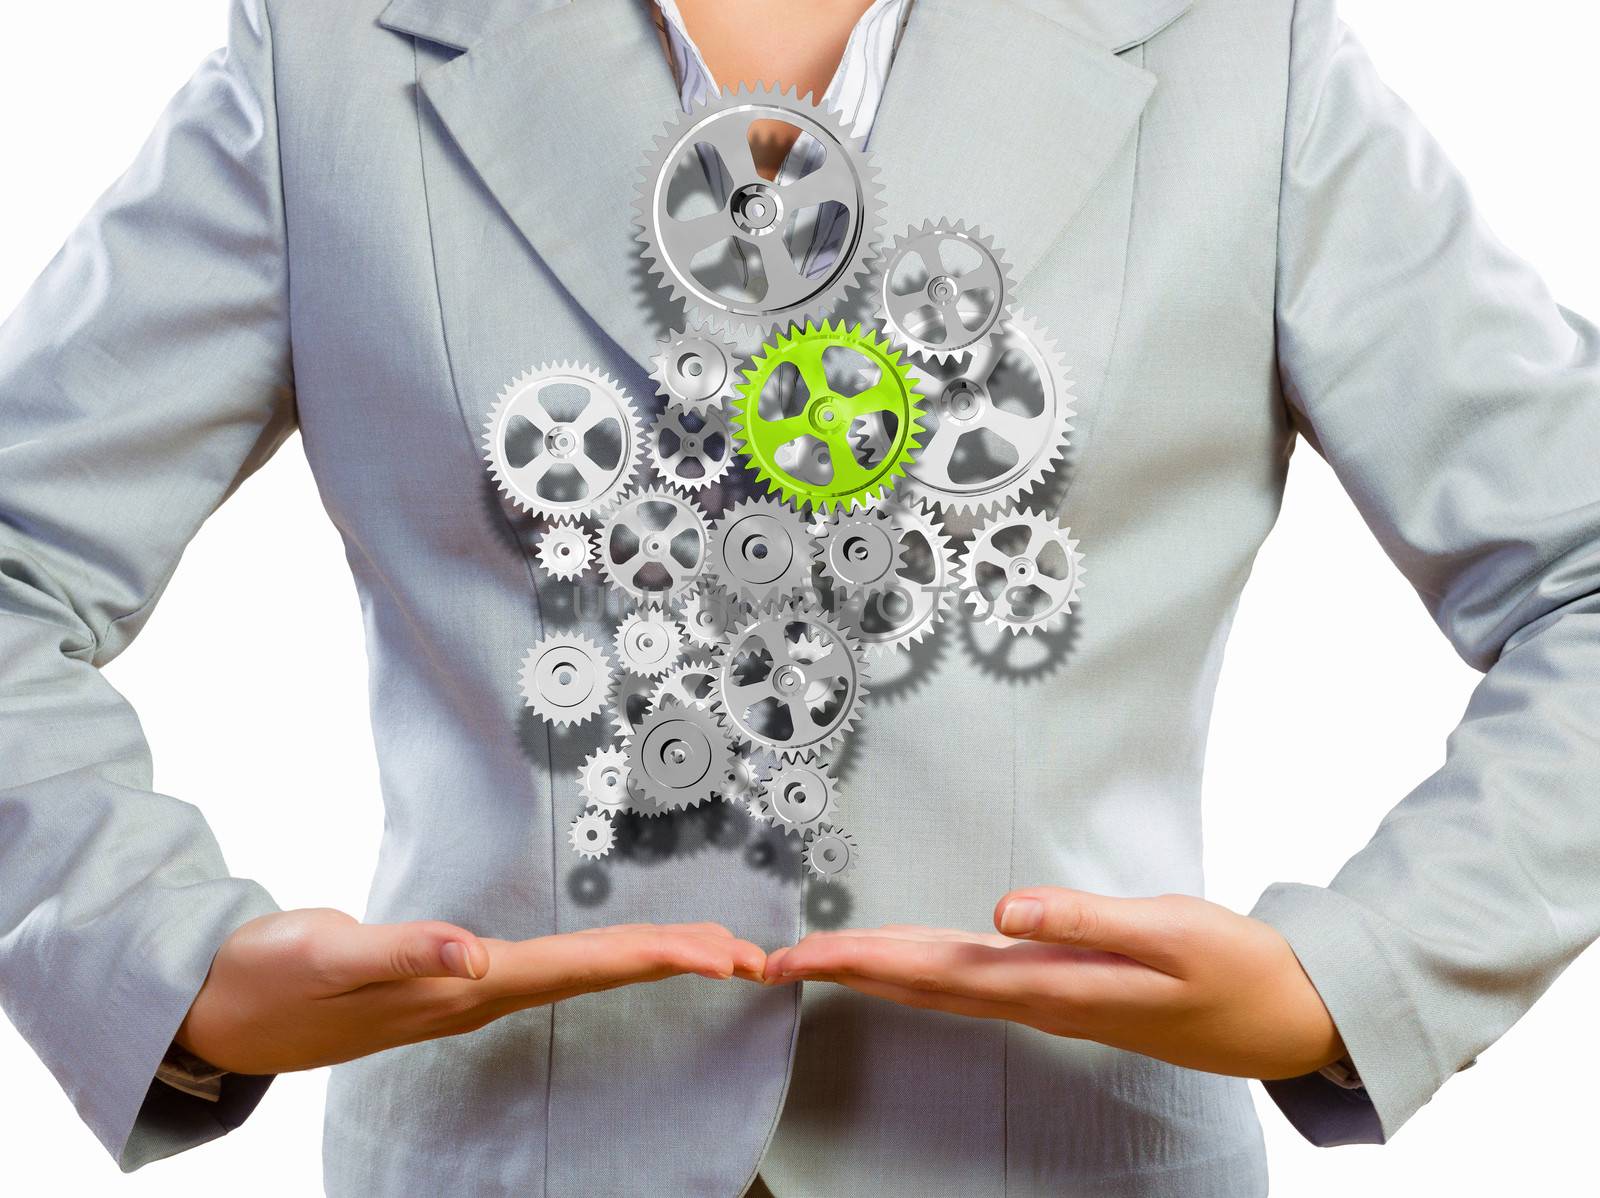 Close up image of businesswoman holding gears in hands